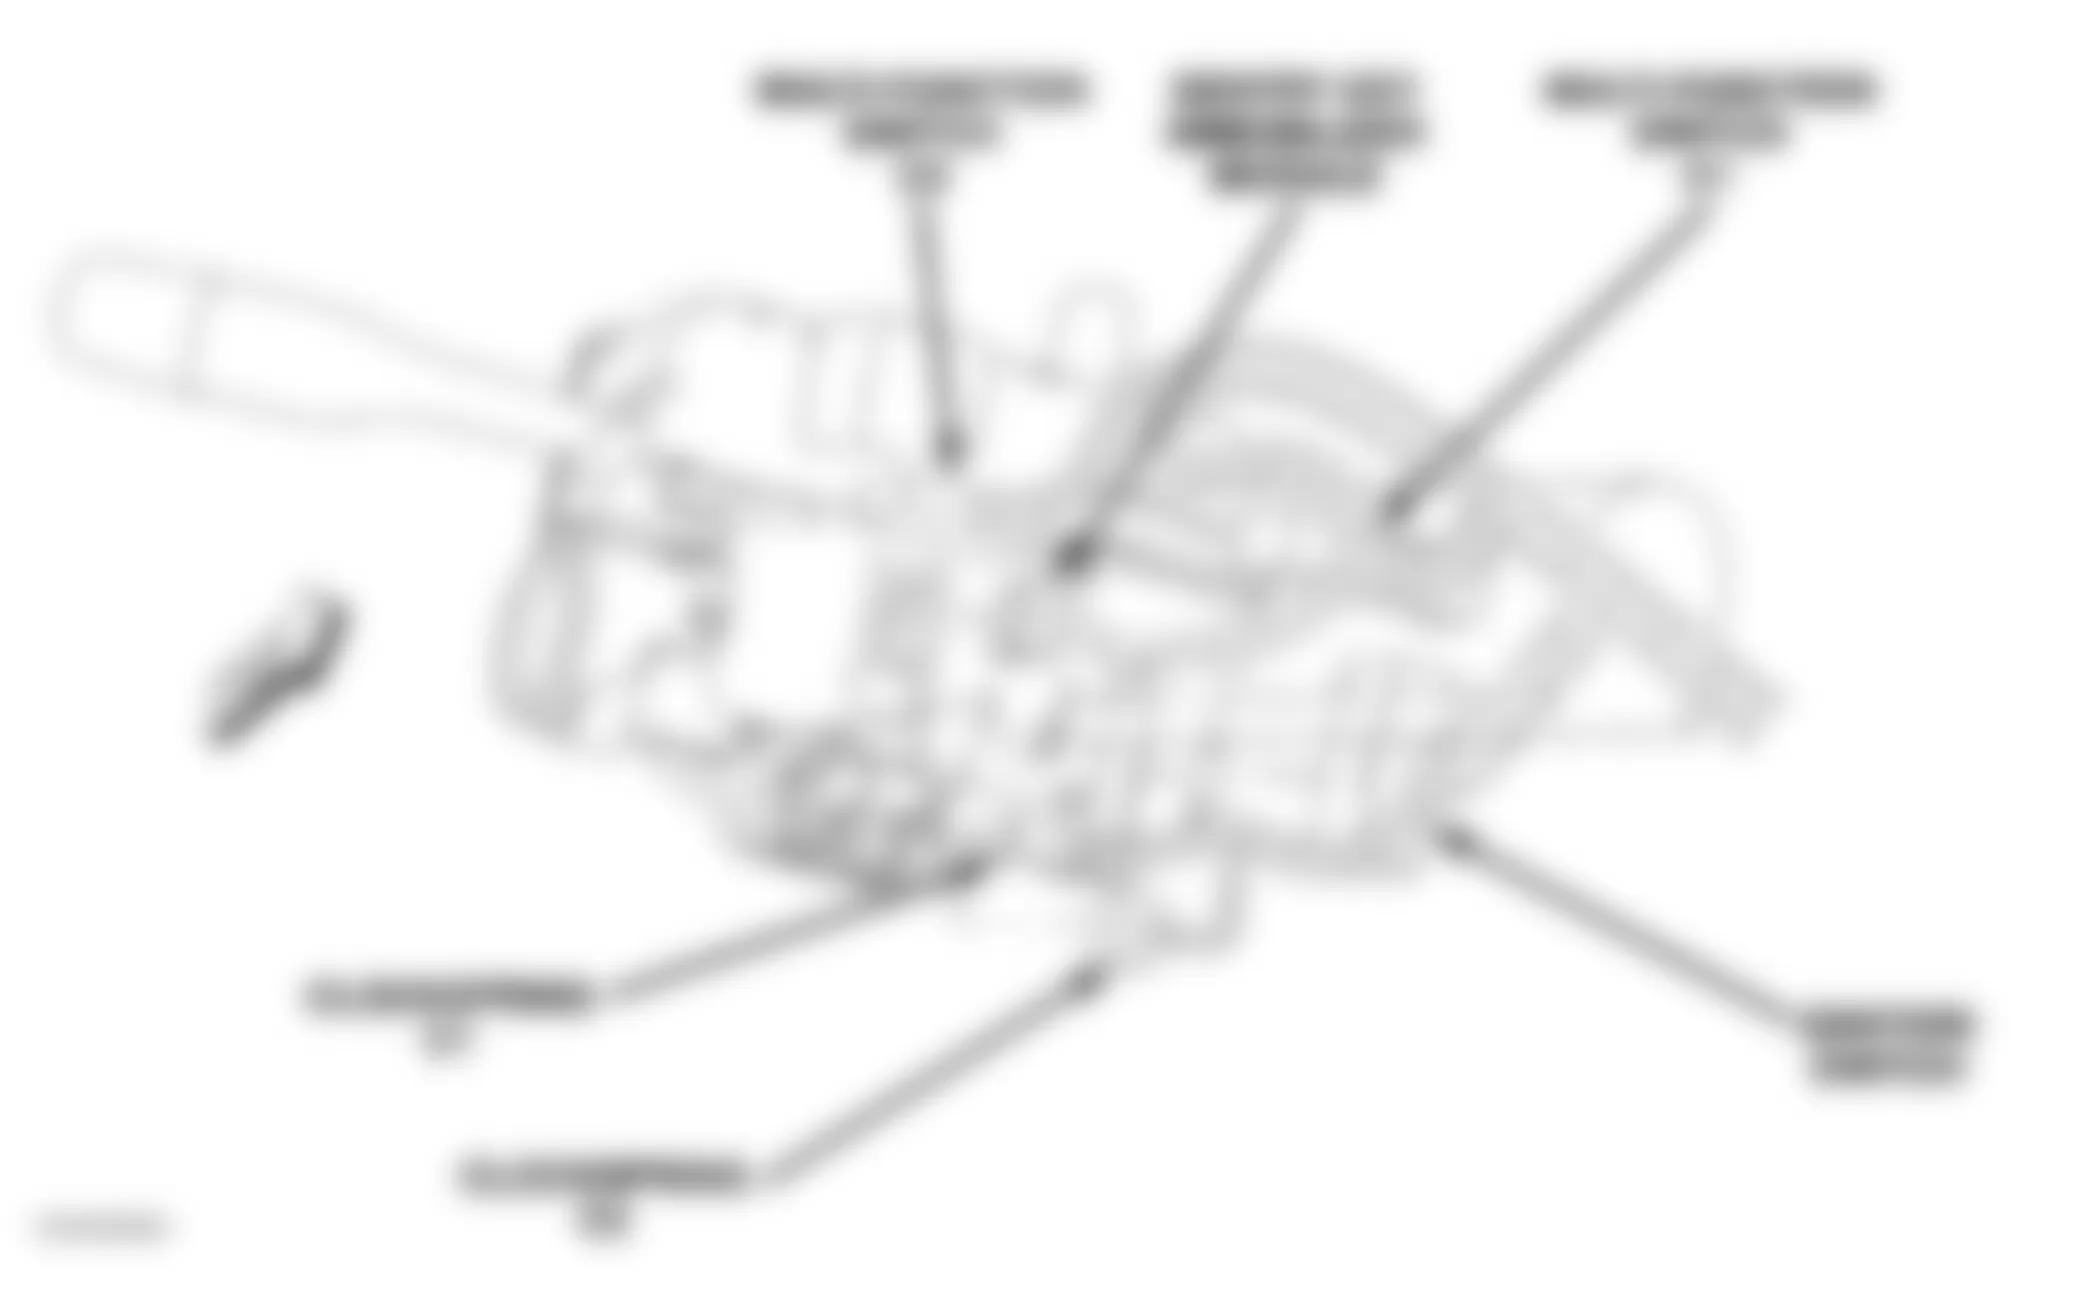 Jeep Wrangler SE 2004 - Component Locations -  Steering Column Connections